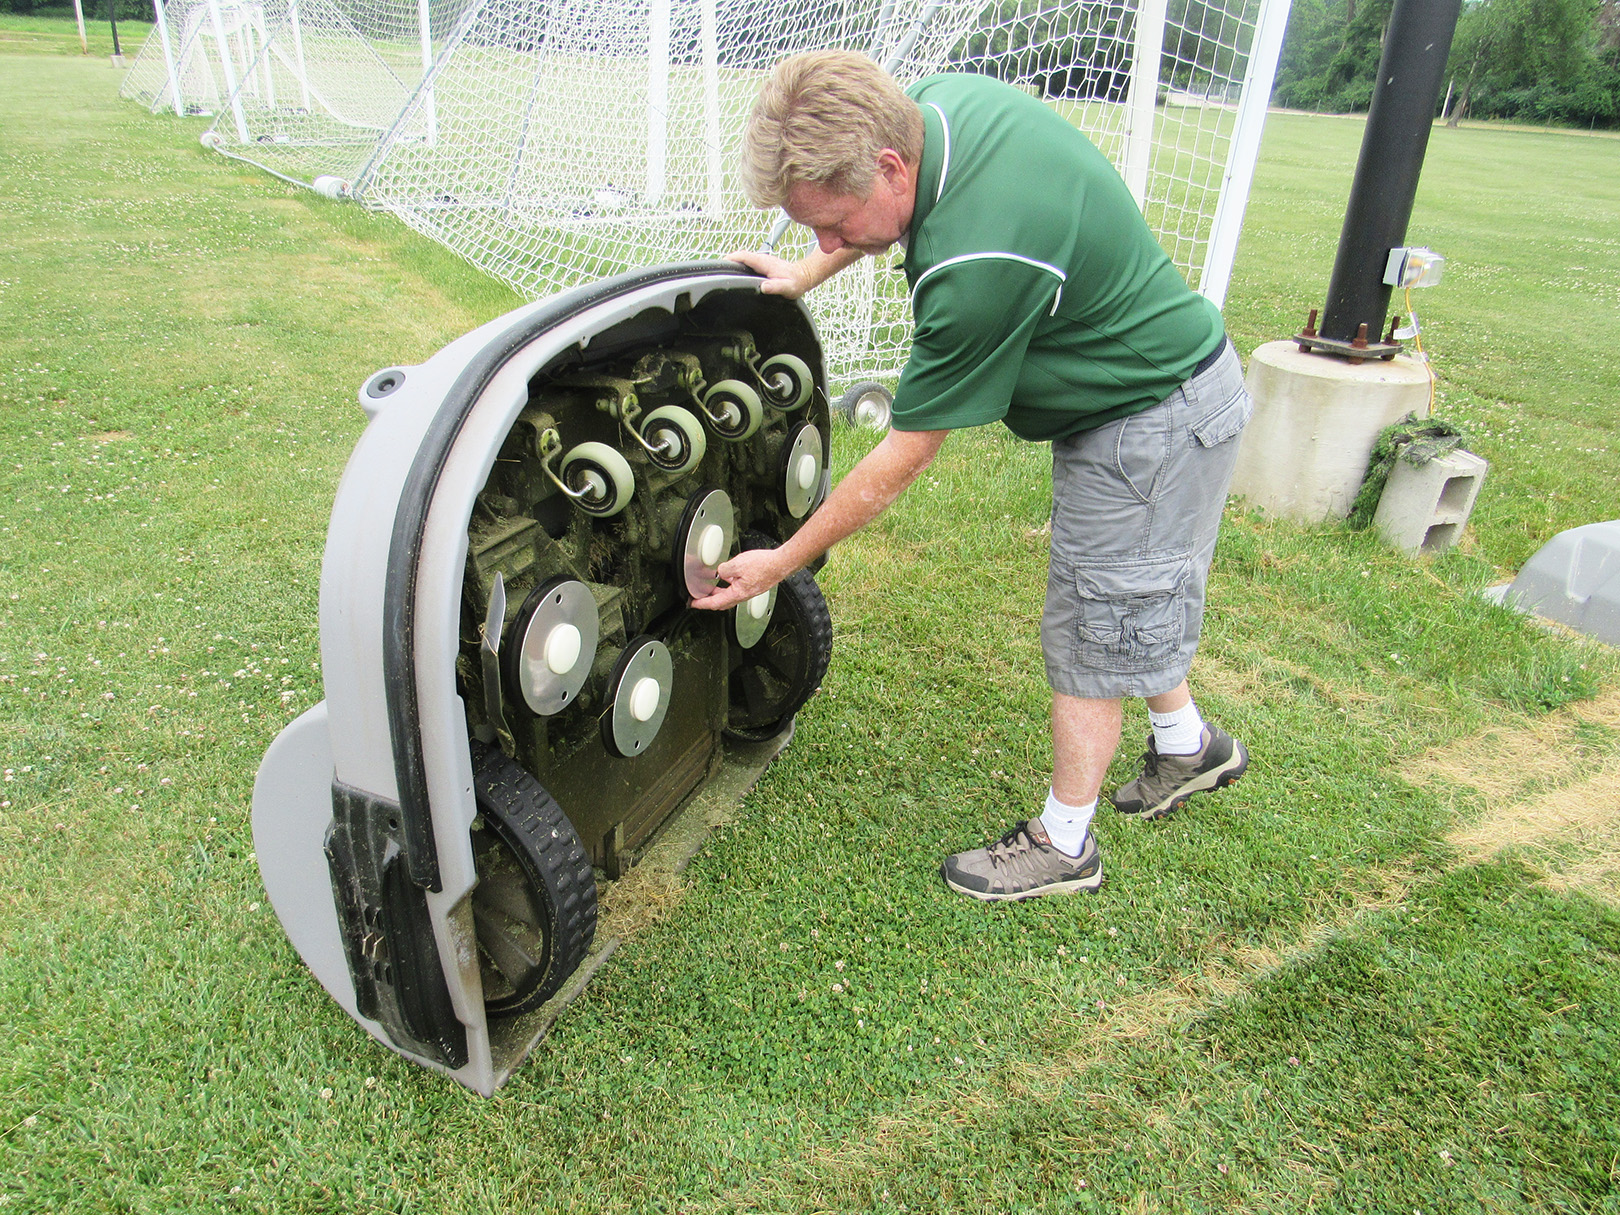 Glen-Ed Soccer Club uses automation to prepare, maintain fields